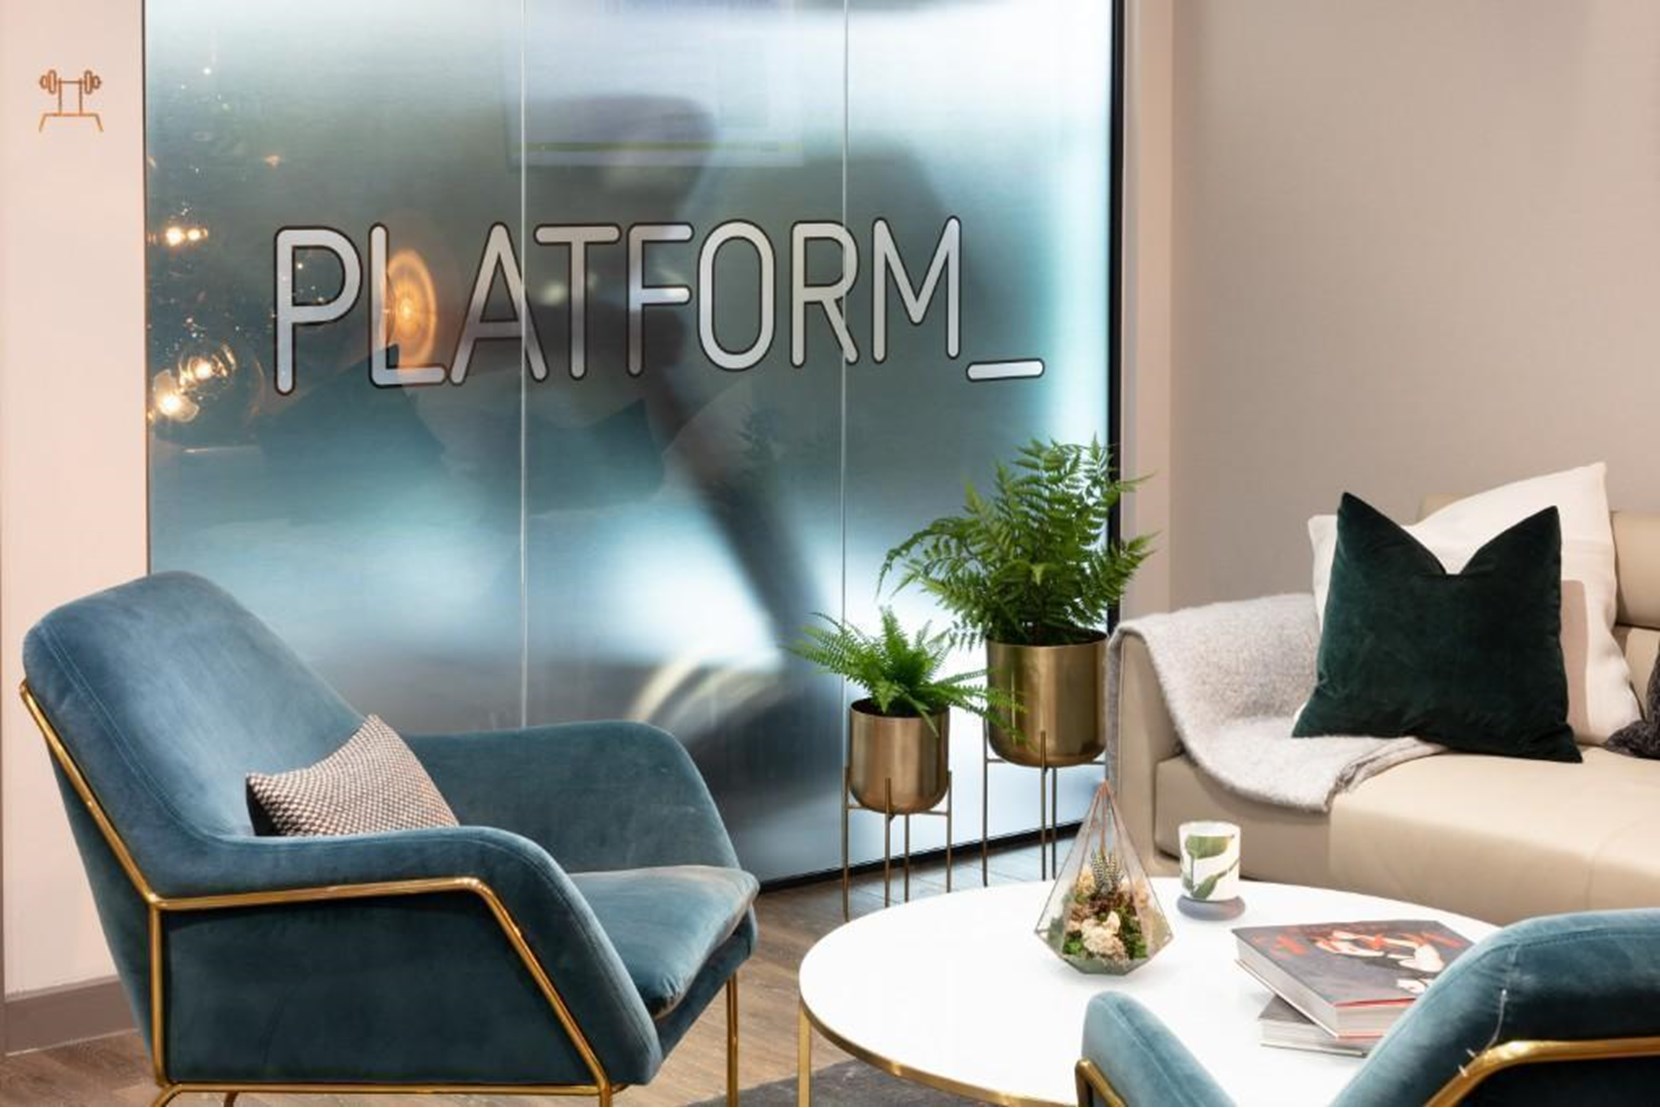 Apartments to Rent by Platform_ at Platform_Exeter, Exeter, EX1, communal lounge area